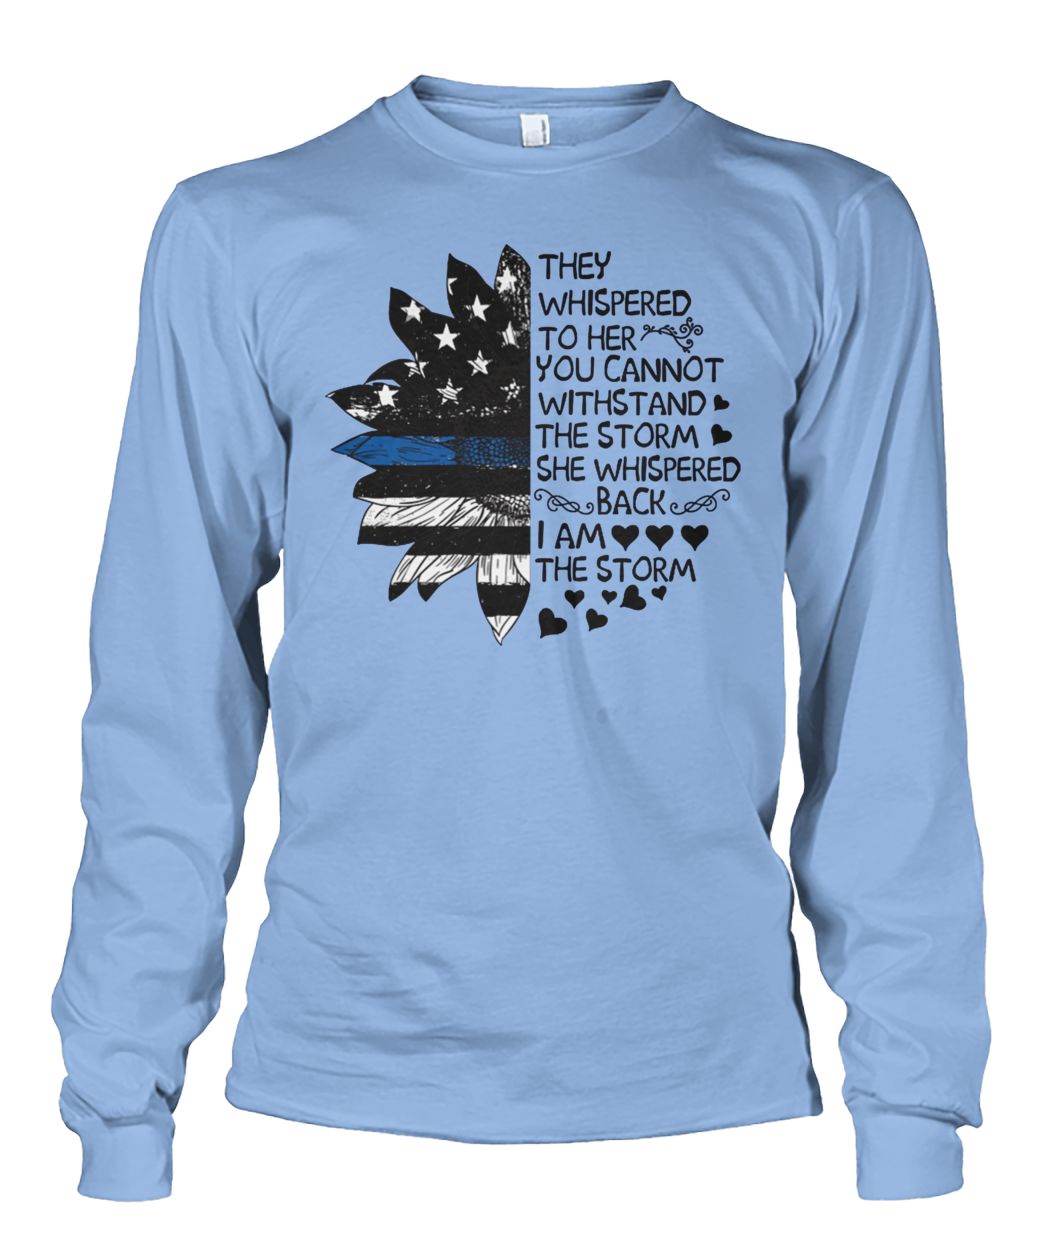 They whispered to her you cannot withstand the storm she whispered back sunflower unisex long sleeve